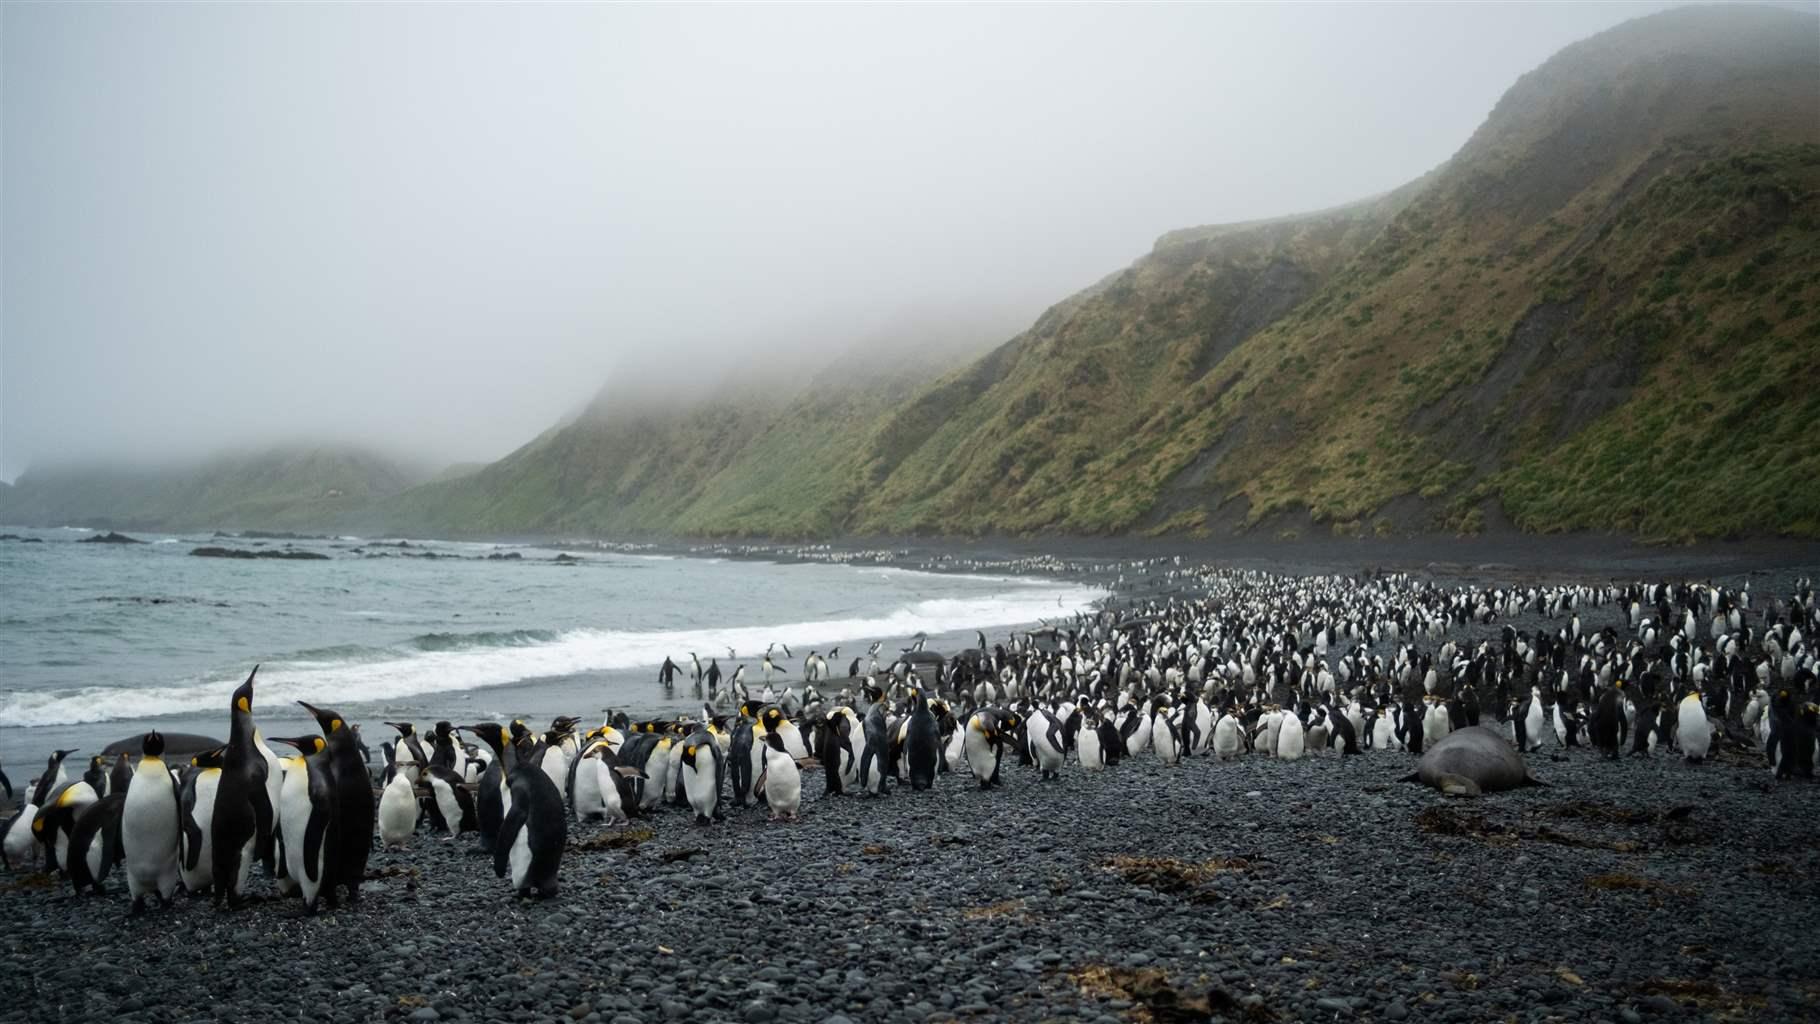 Thousands of penguins crowd an arcing shoreline where a relative calm, milky grey sea washes onto a beach of predominantly small, smooth black stones. Steep hills of mottled green and brown vegetation rise from the shore into a layer of mist and clouds. 